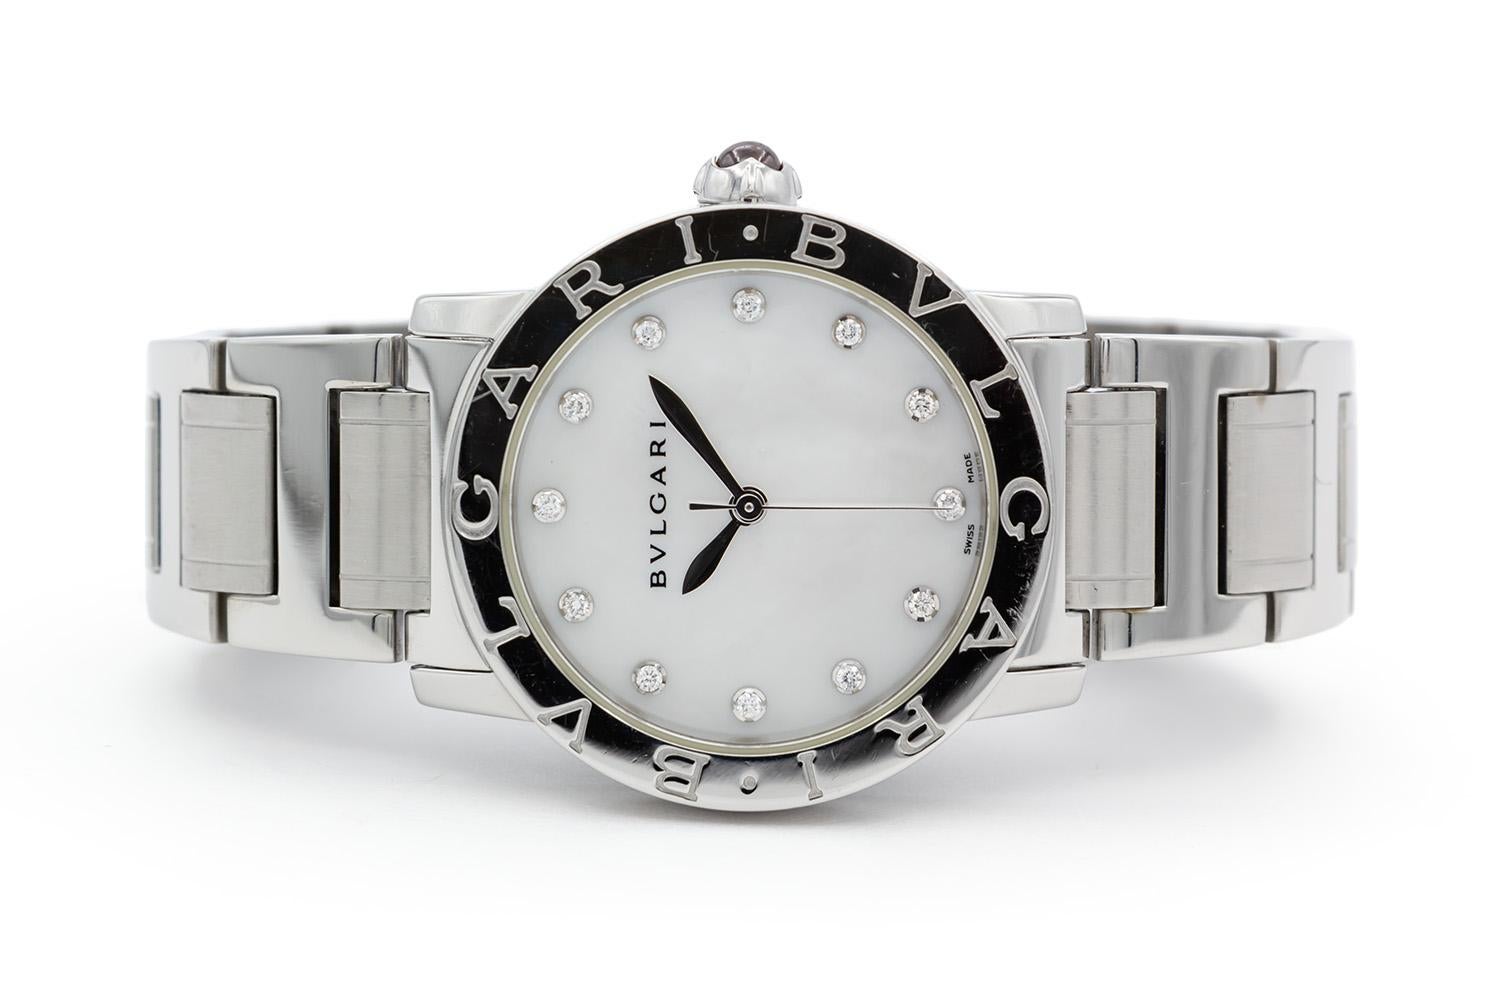 We are pleased to offer this Bulgari Bvlgari BBL33S Stainless Steel Automatic Watch. It features a 33mm stainless steel case, white mother of pearl dial with diamond hour markers, stainless steel bracelet and automatic movement. It will fit up to a